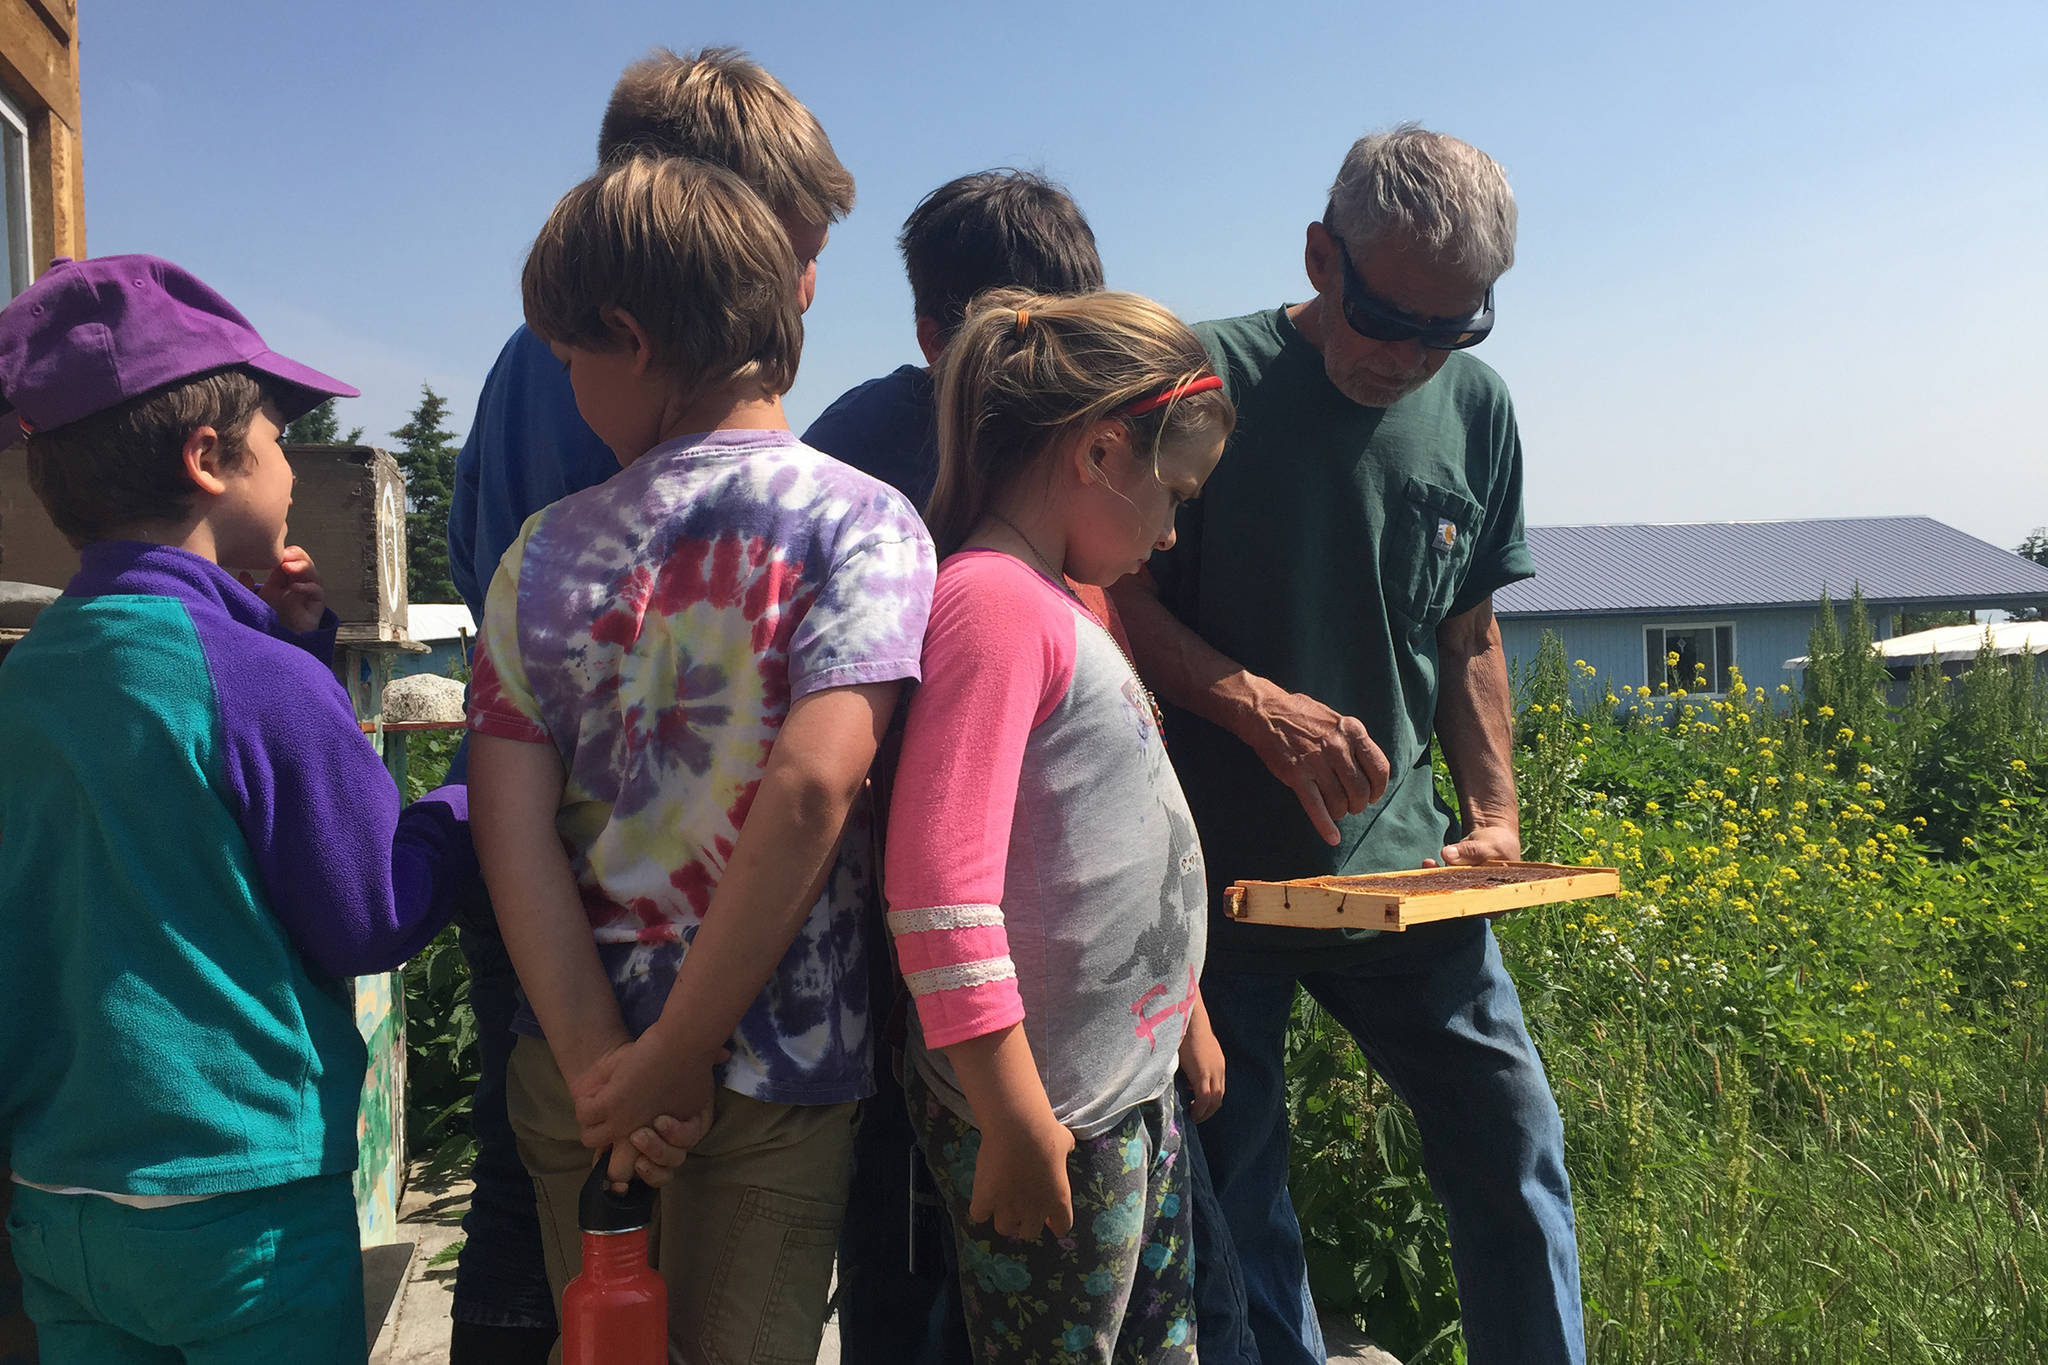 Rob Lund, right, shows a beehive to children on a Center for Alaskan Coastal Studies field trip on June 30, 2019, in Homer, Alaska. (Photo provided)